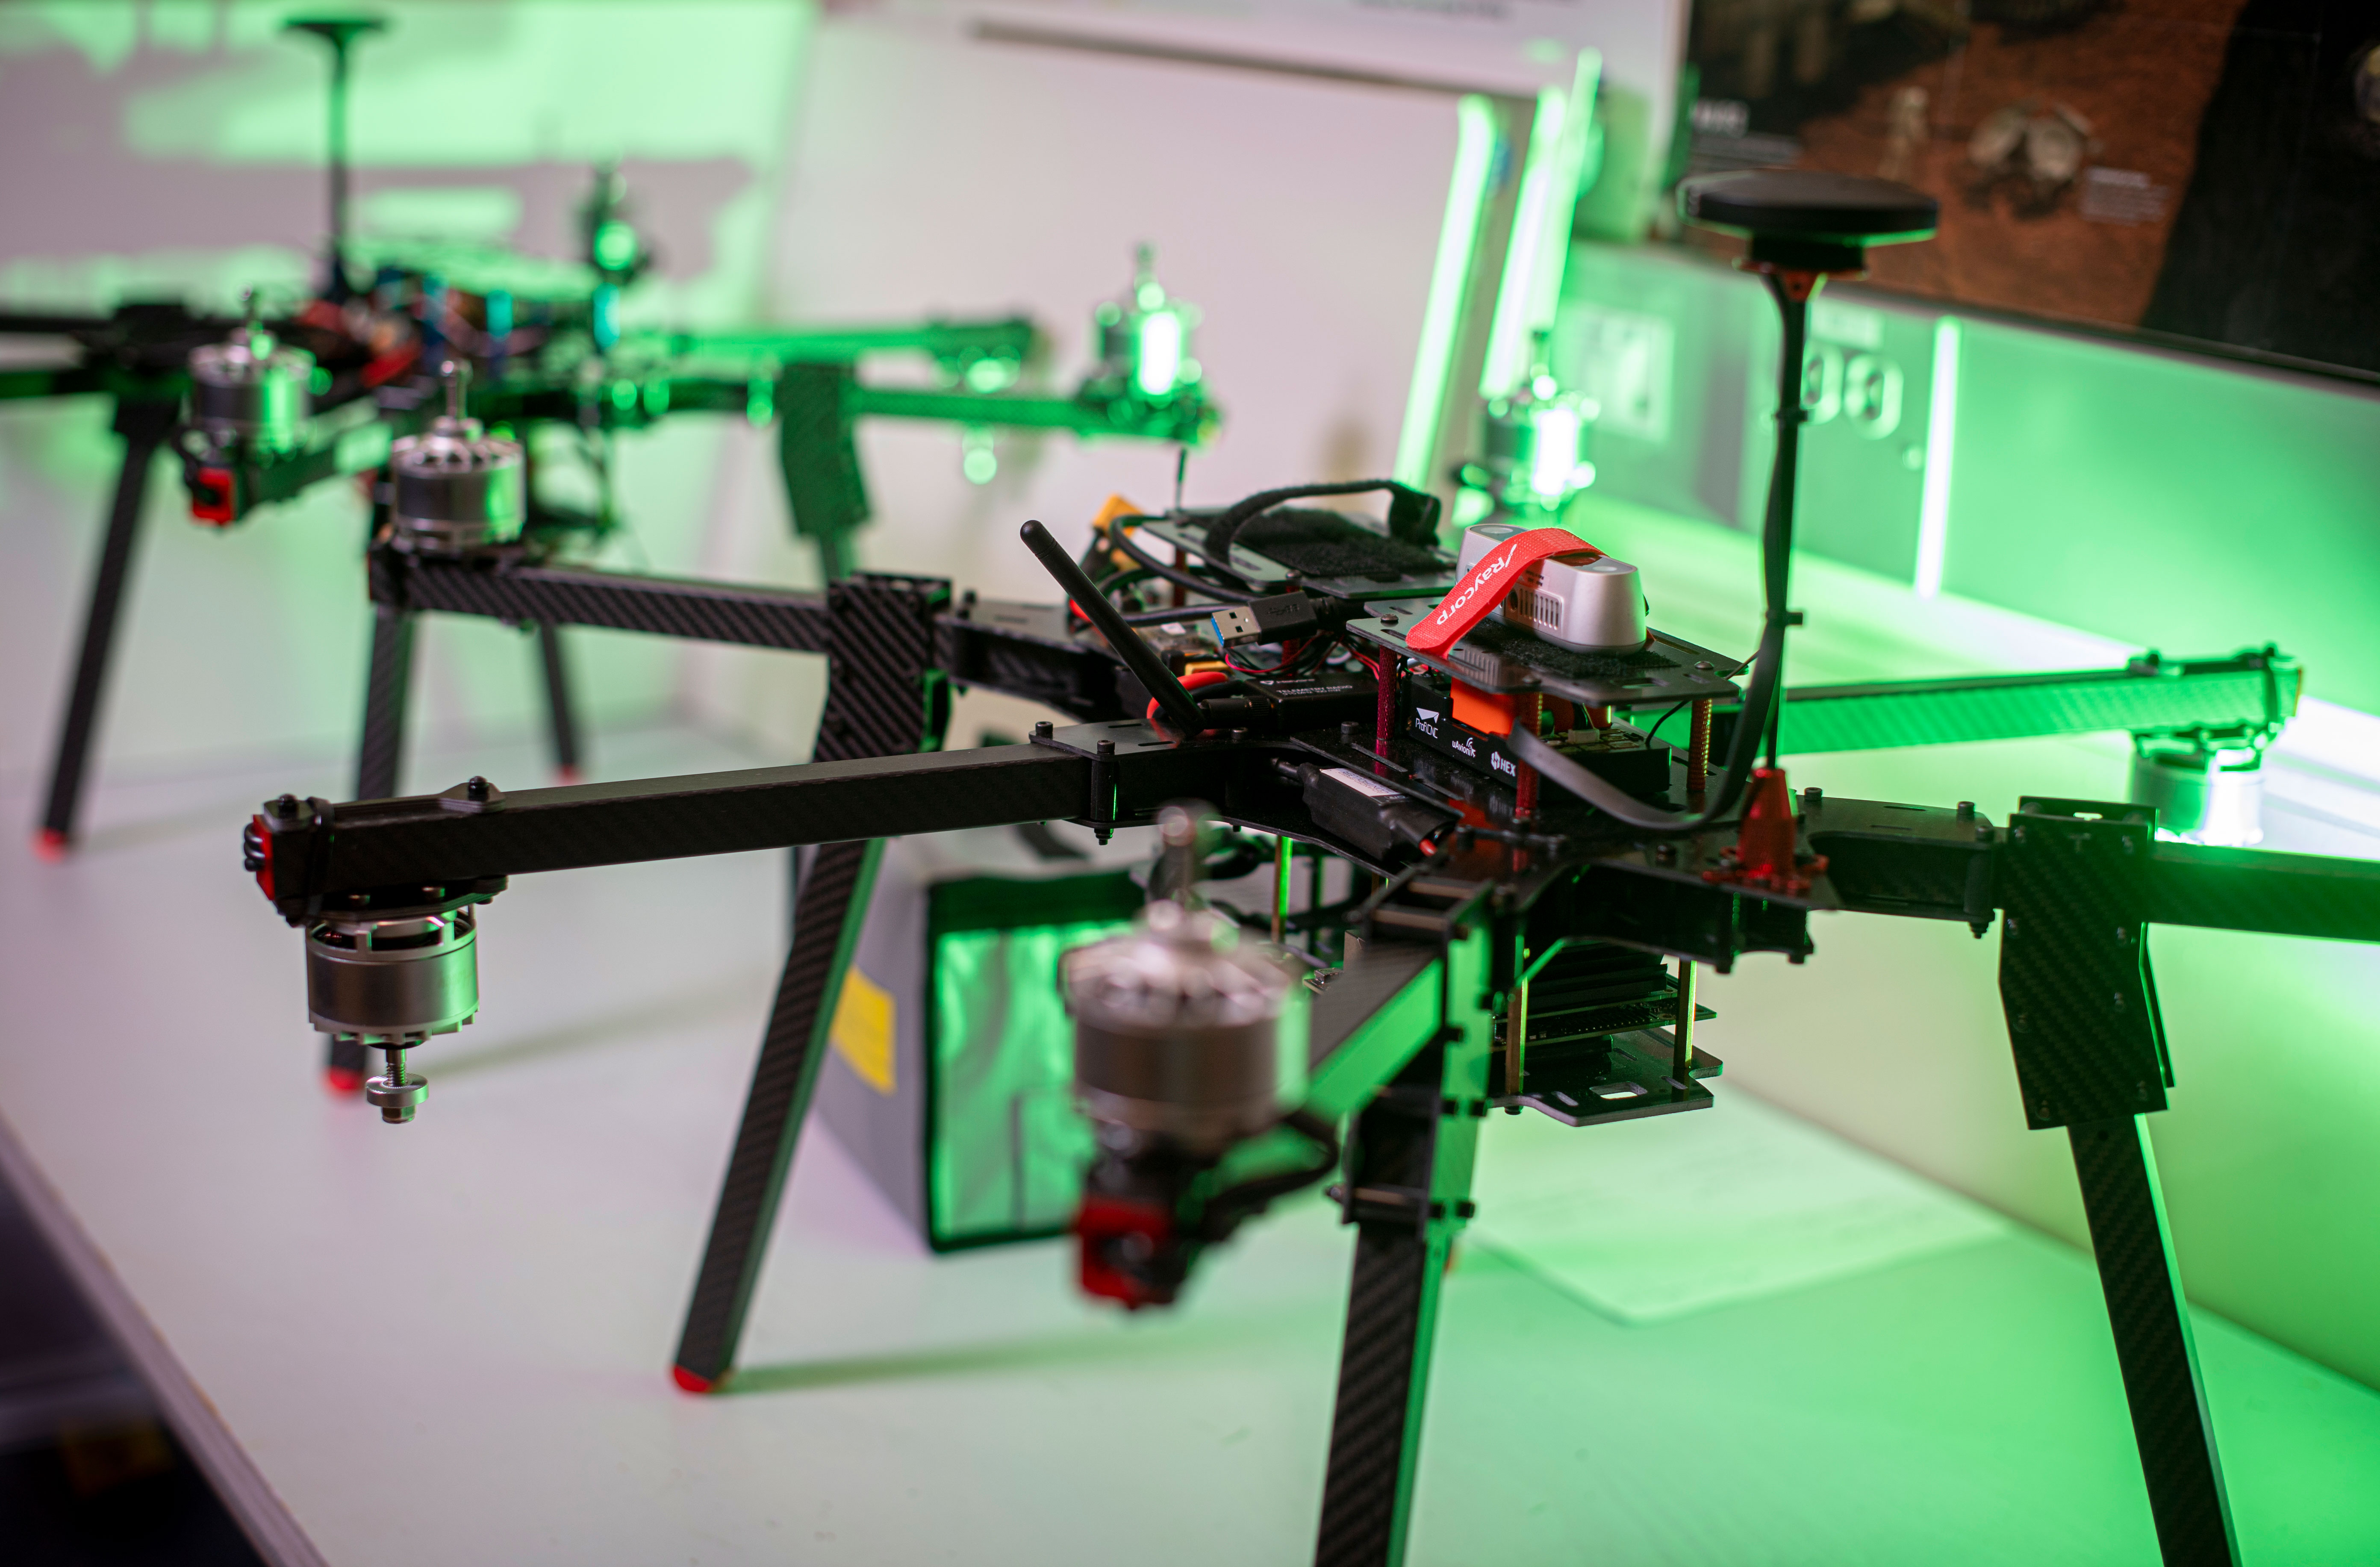 Photo of drones sitting on a table with a green light in the background